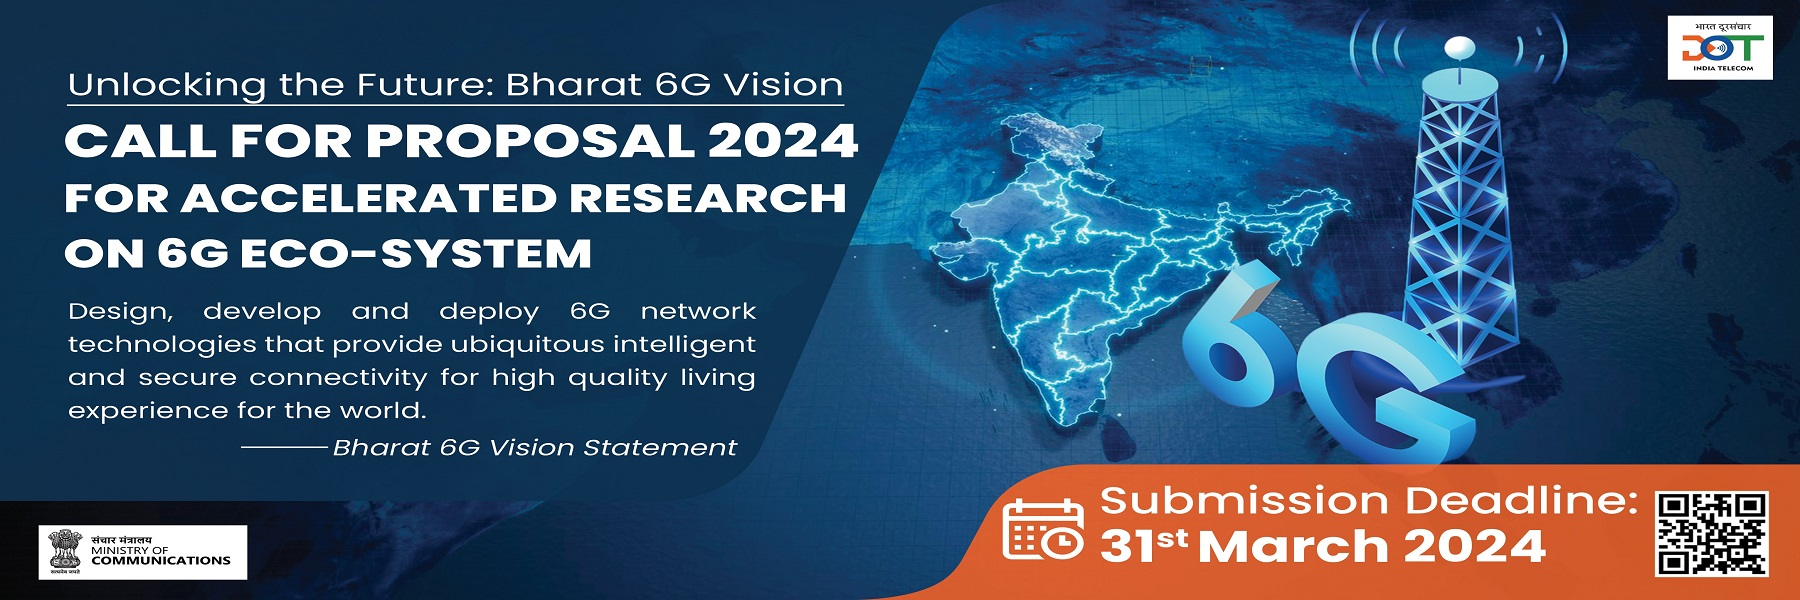 Call for proposal for accelerated research on 6G Eco-system